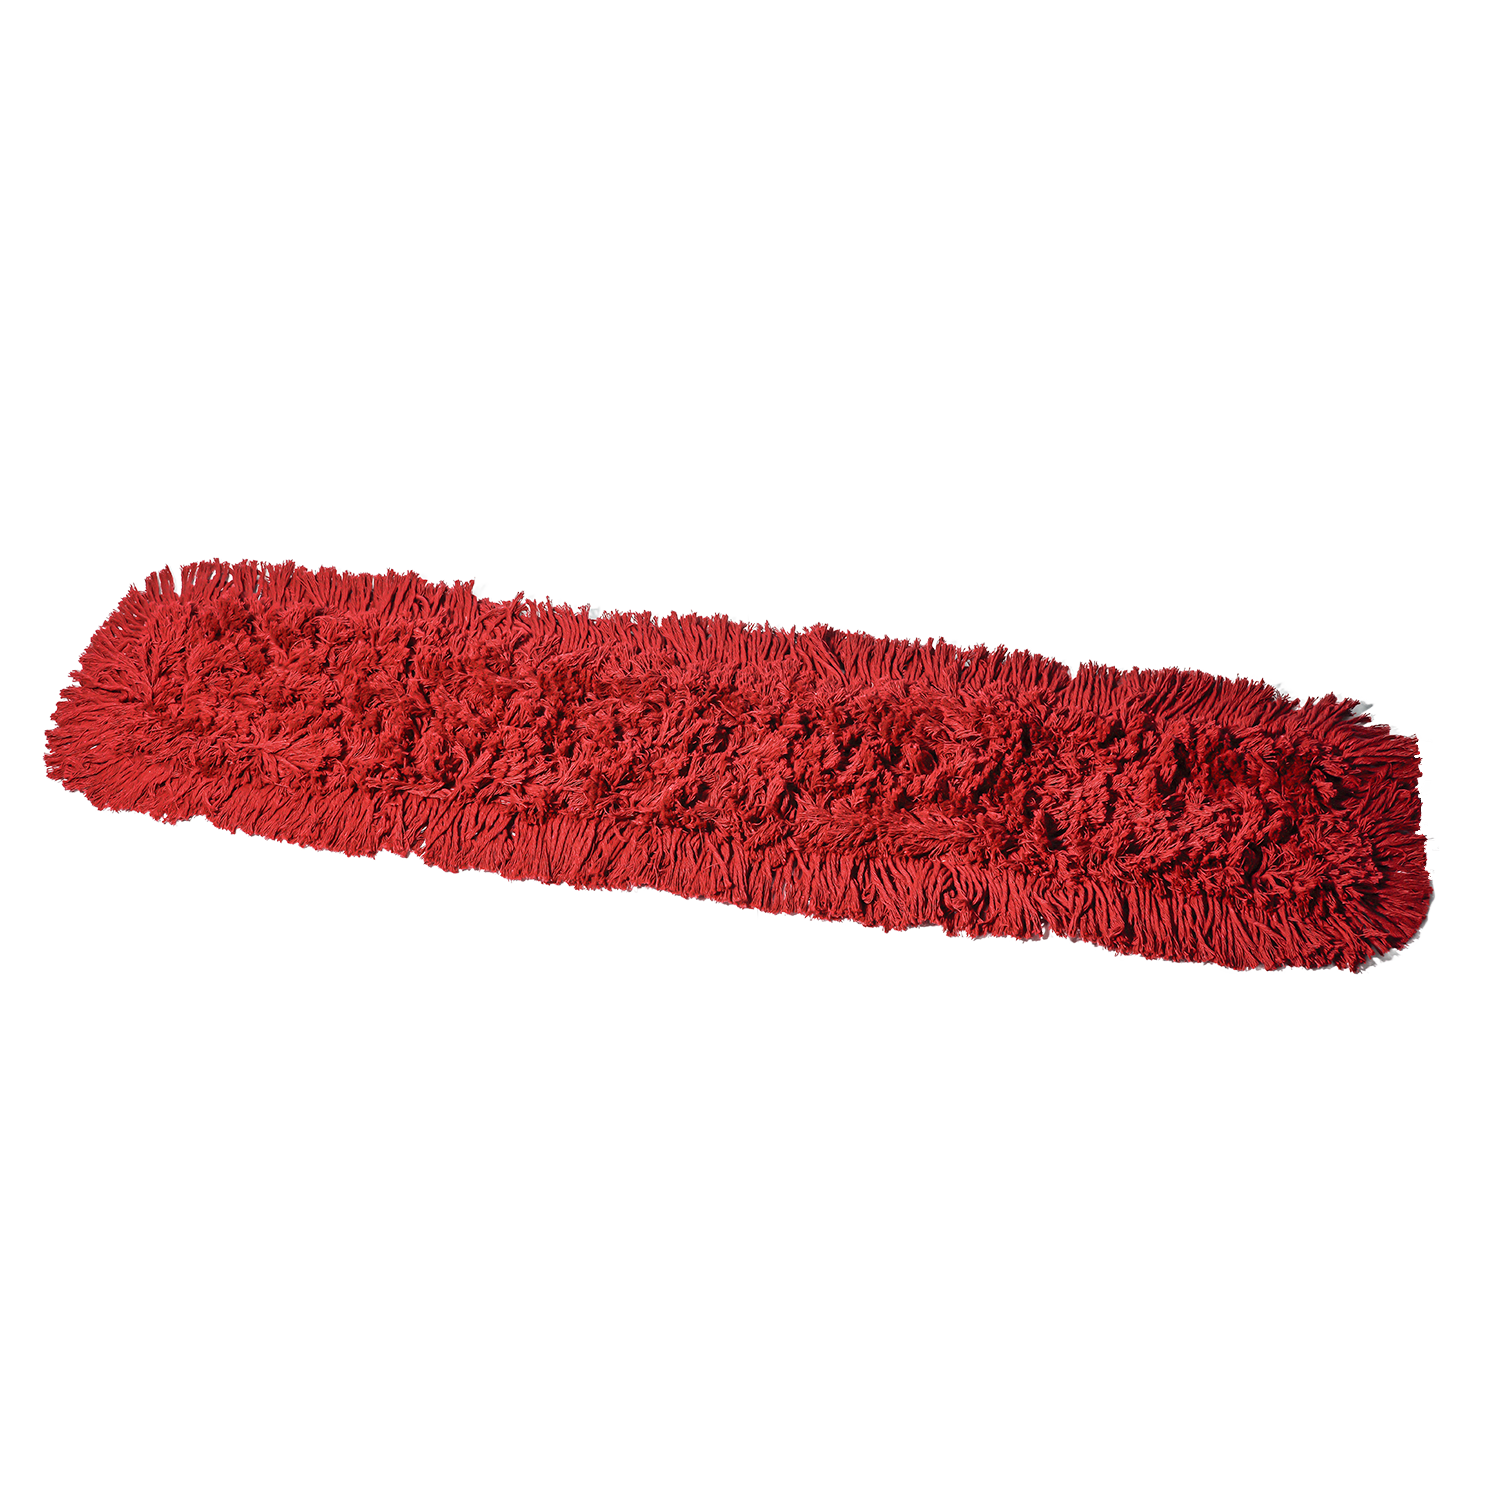 Tidy Tools 36 Inch Dust Mop Refill, Red